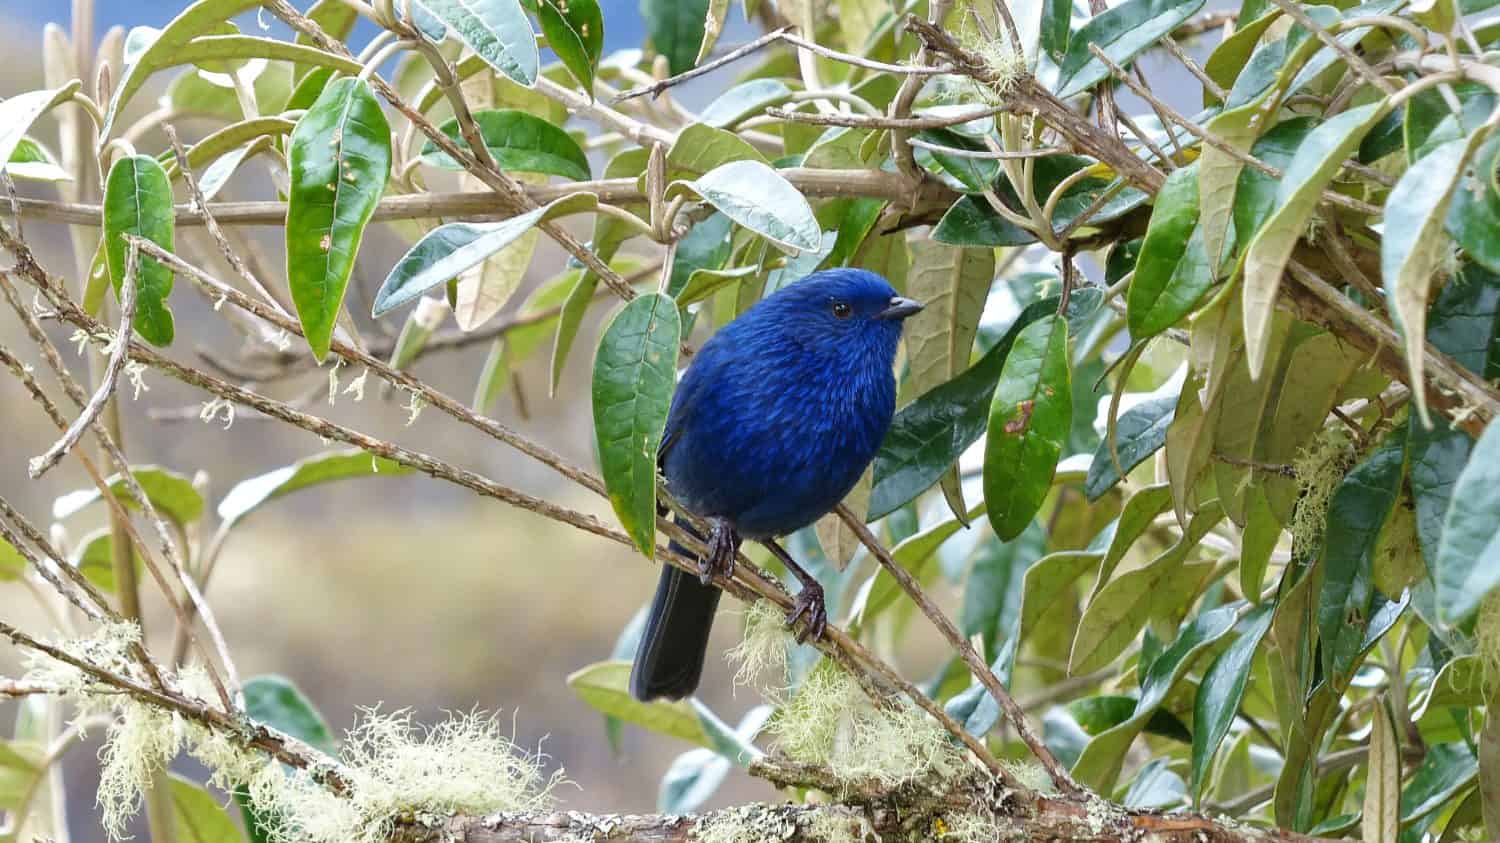 Blue colored bird Tit-Like Dacnis (Xeno Dacnis marina), male, perched on the branch in Cajas National Park, Andes mountains, Azuay province near Cuenca, Ecuador